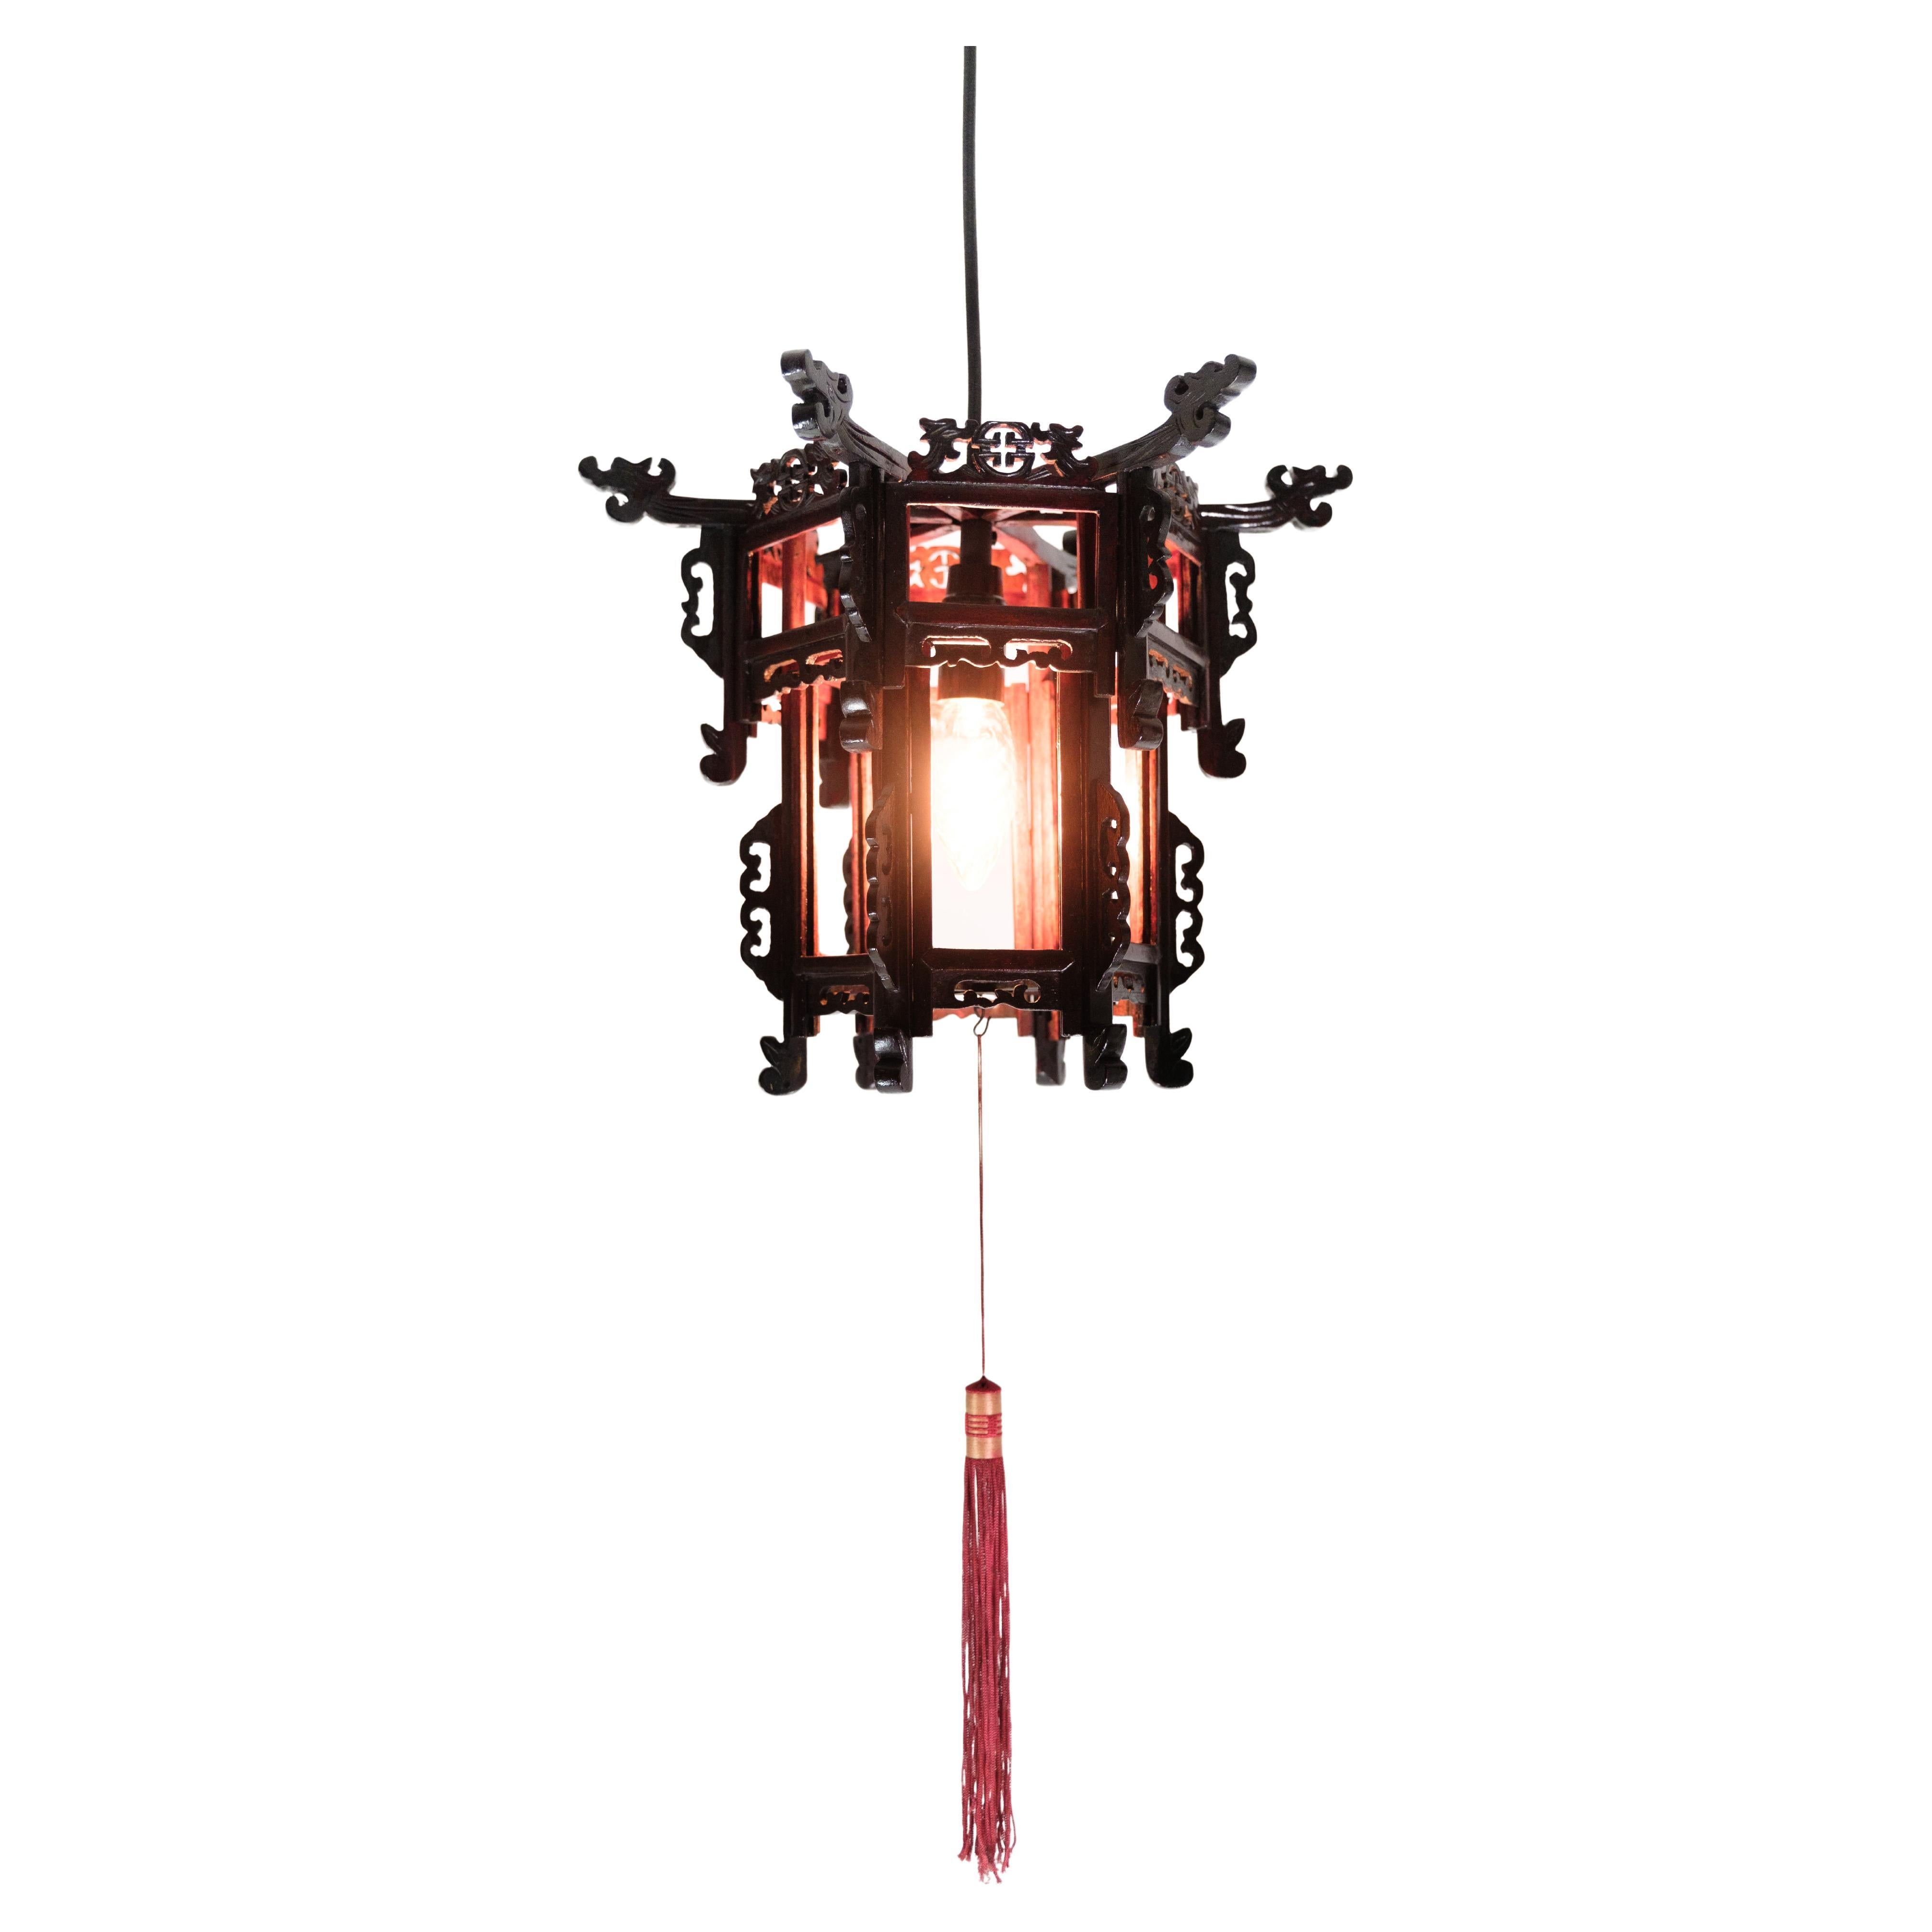 Ceiling lamp made of wood with Chinese-style decoration lantern from 1930s